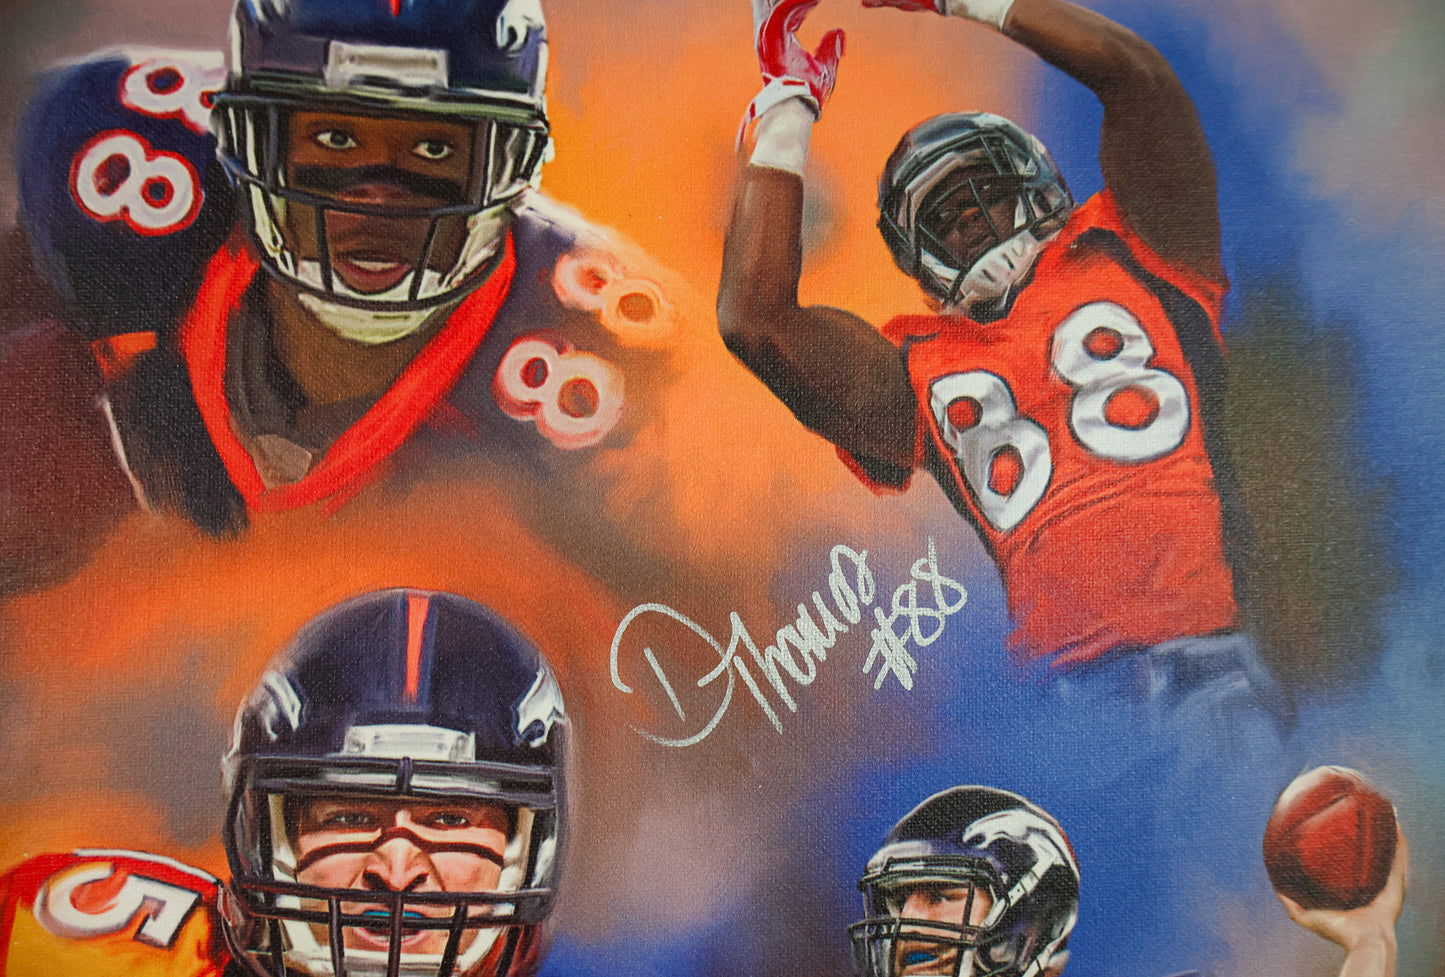 Tim Tebow and Demaryius Thomas Autographed Denver Broncos Canvas Piece